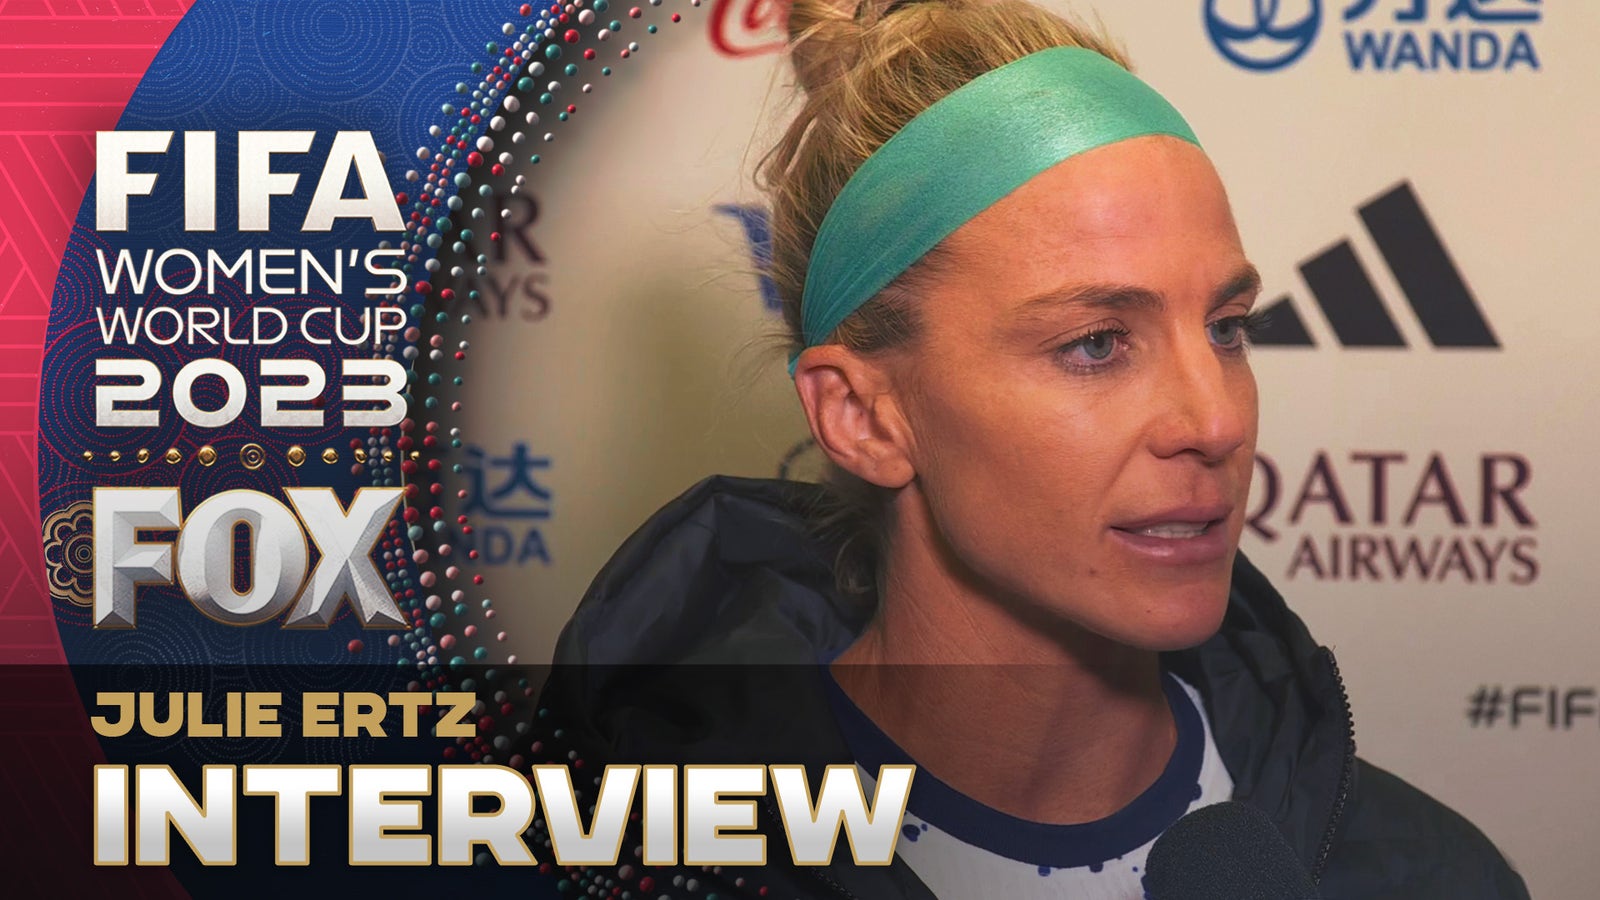 USWNT's Julie Ertz on being 'fired up' to come back and tie the game against the Netherlands